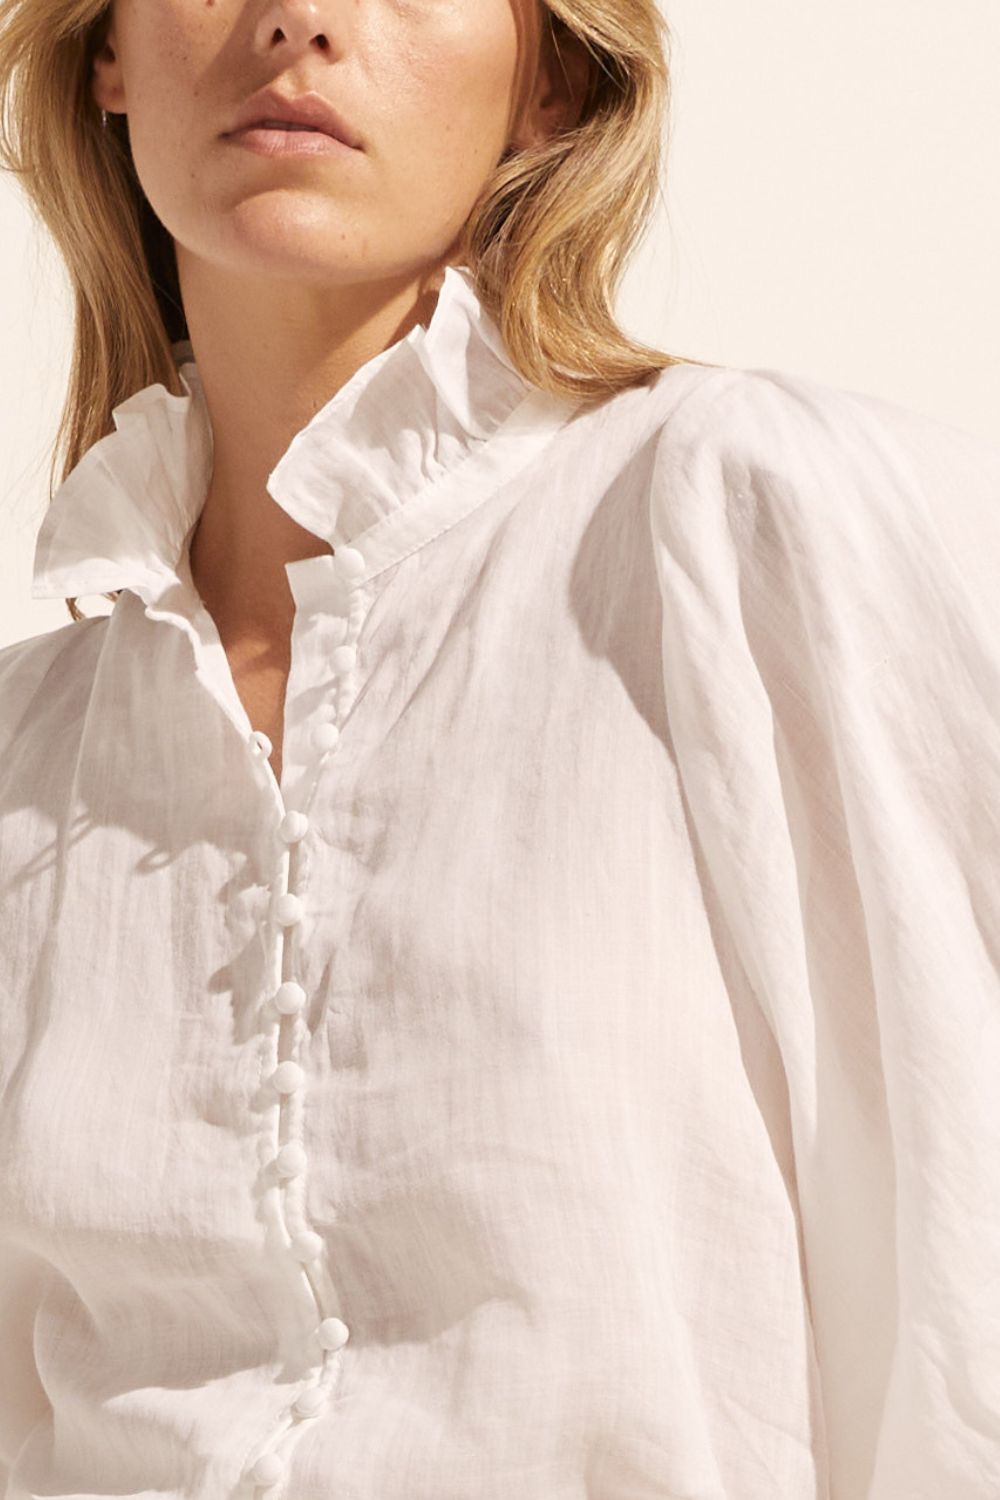 white, ruffle neck collar, buttons down centre, mid length sleeve, shirt, close up view